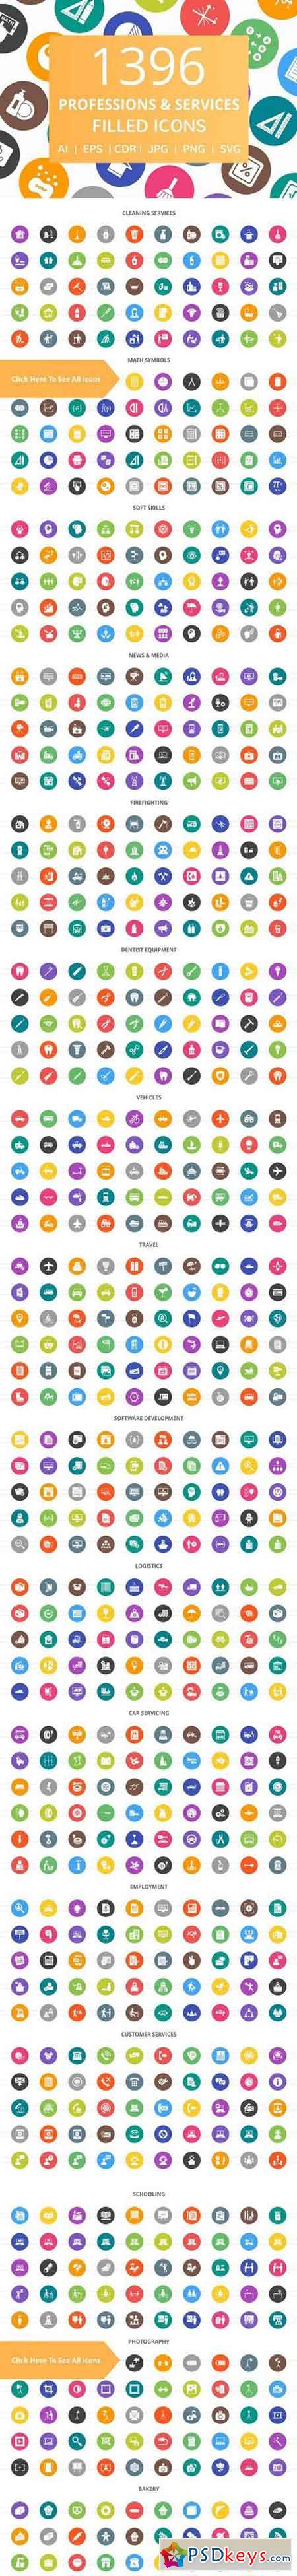 1396 Professions Filled Round Icons 2428144